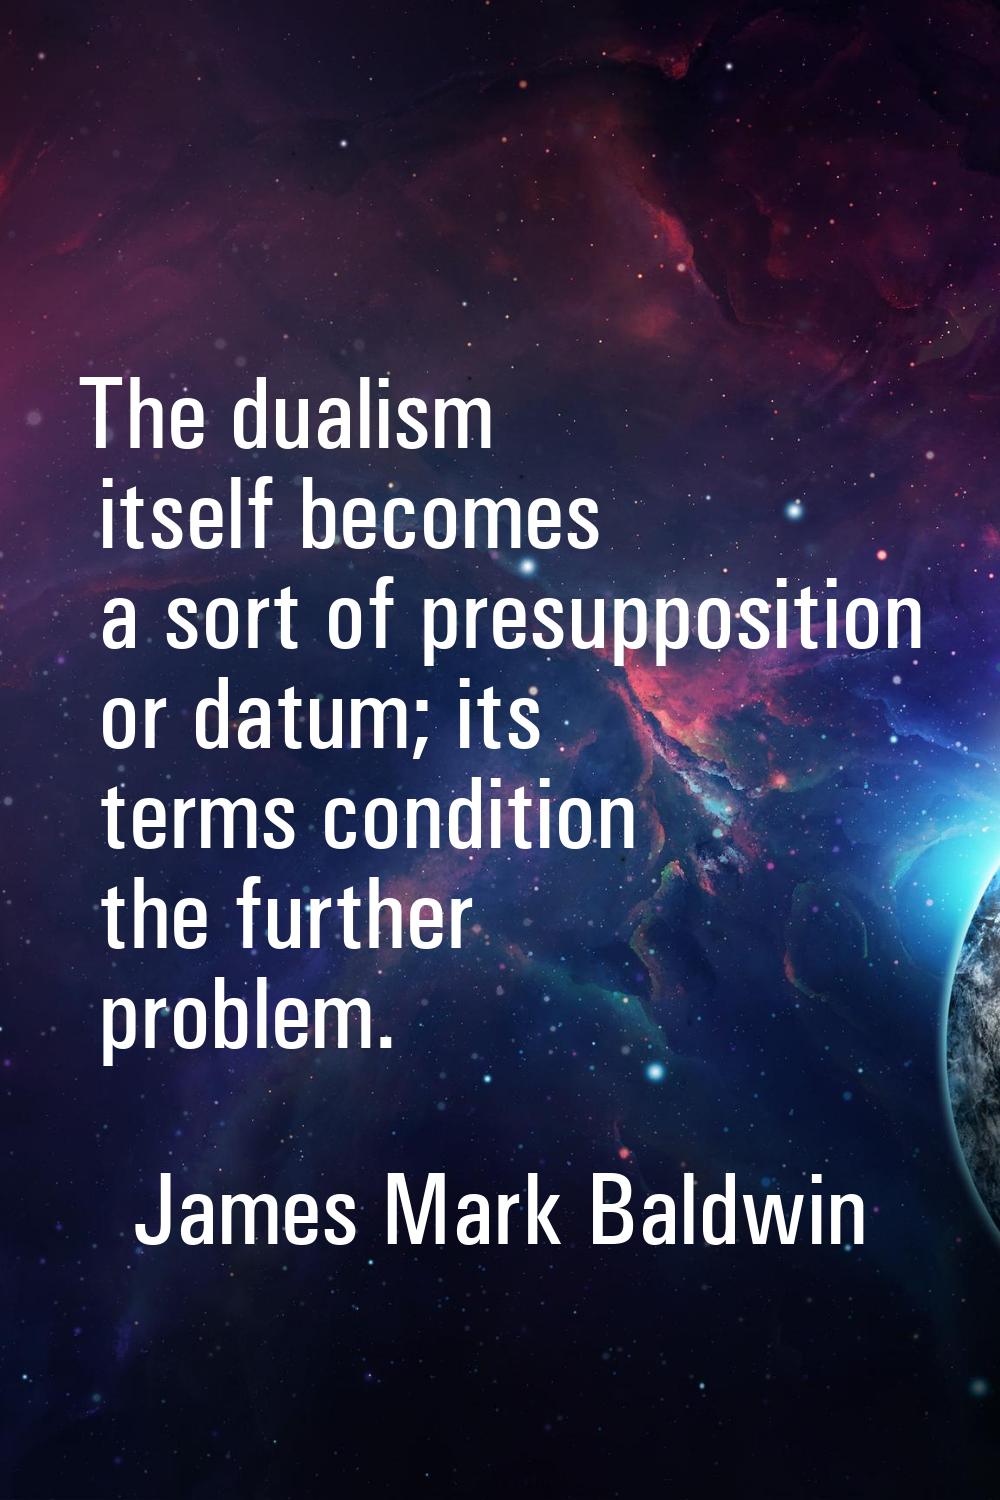 The dualism itself becomes a sort of presupposition or datum; its terms condition the further probl